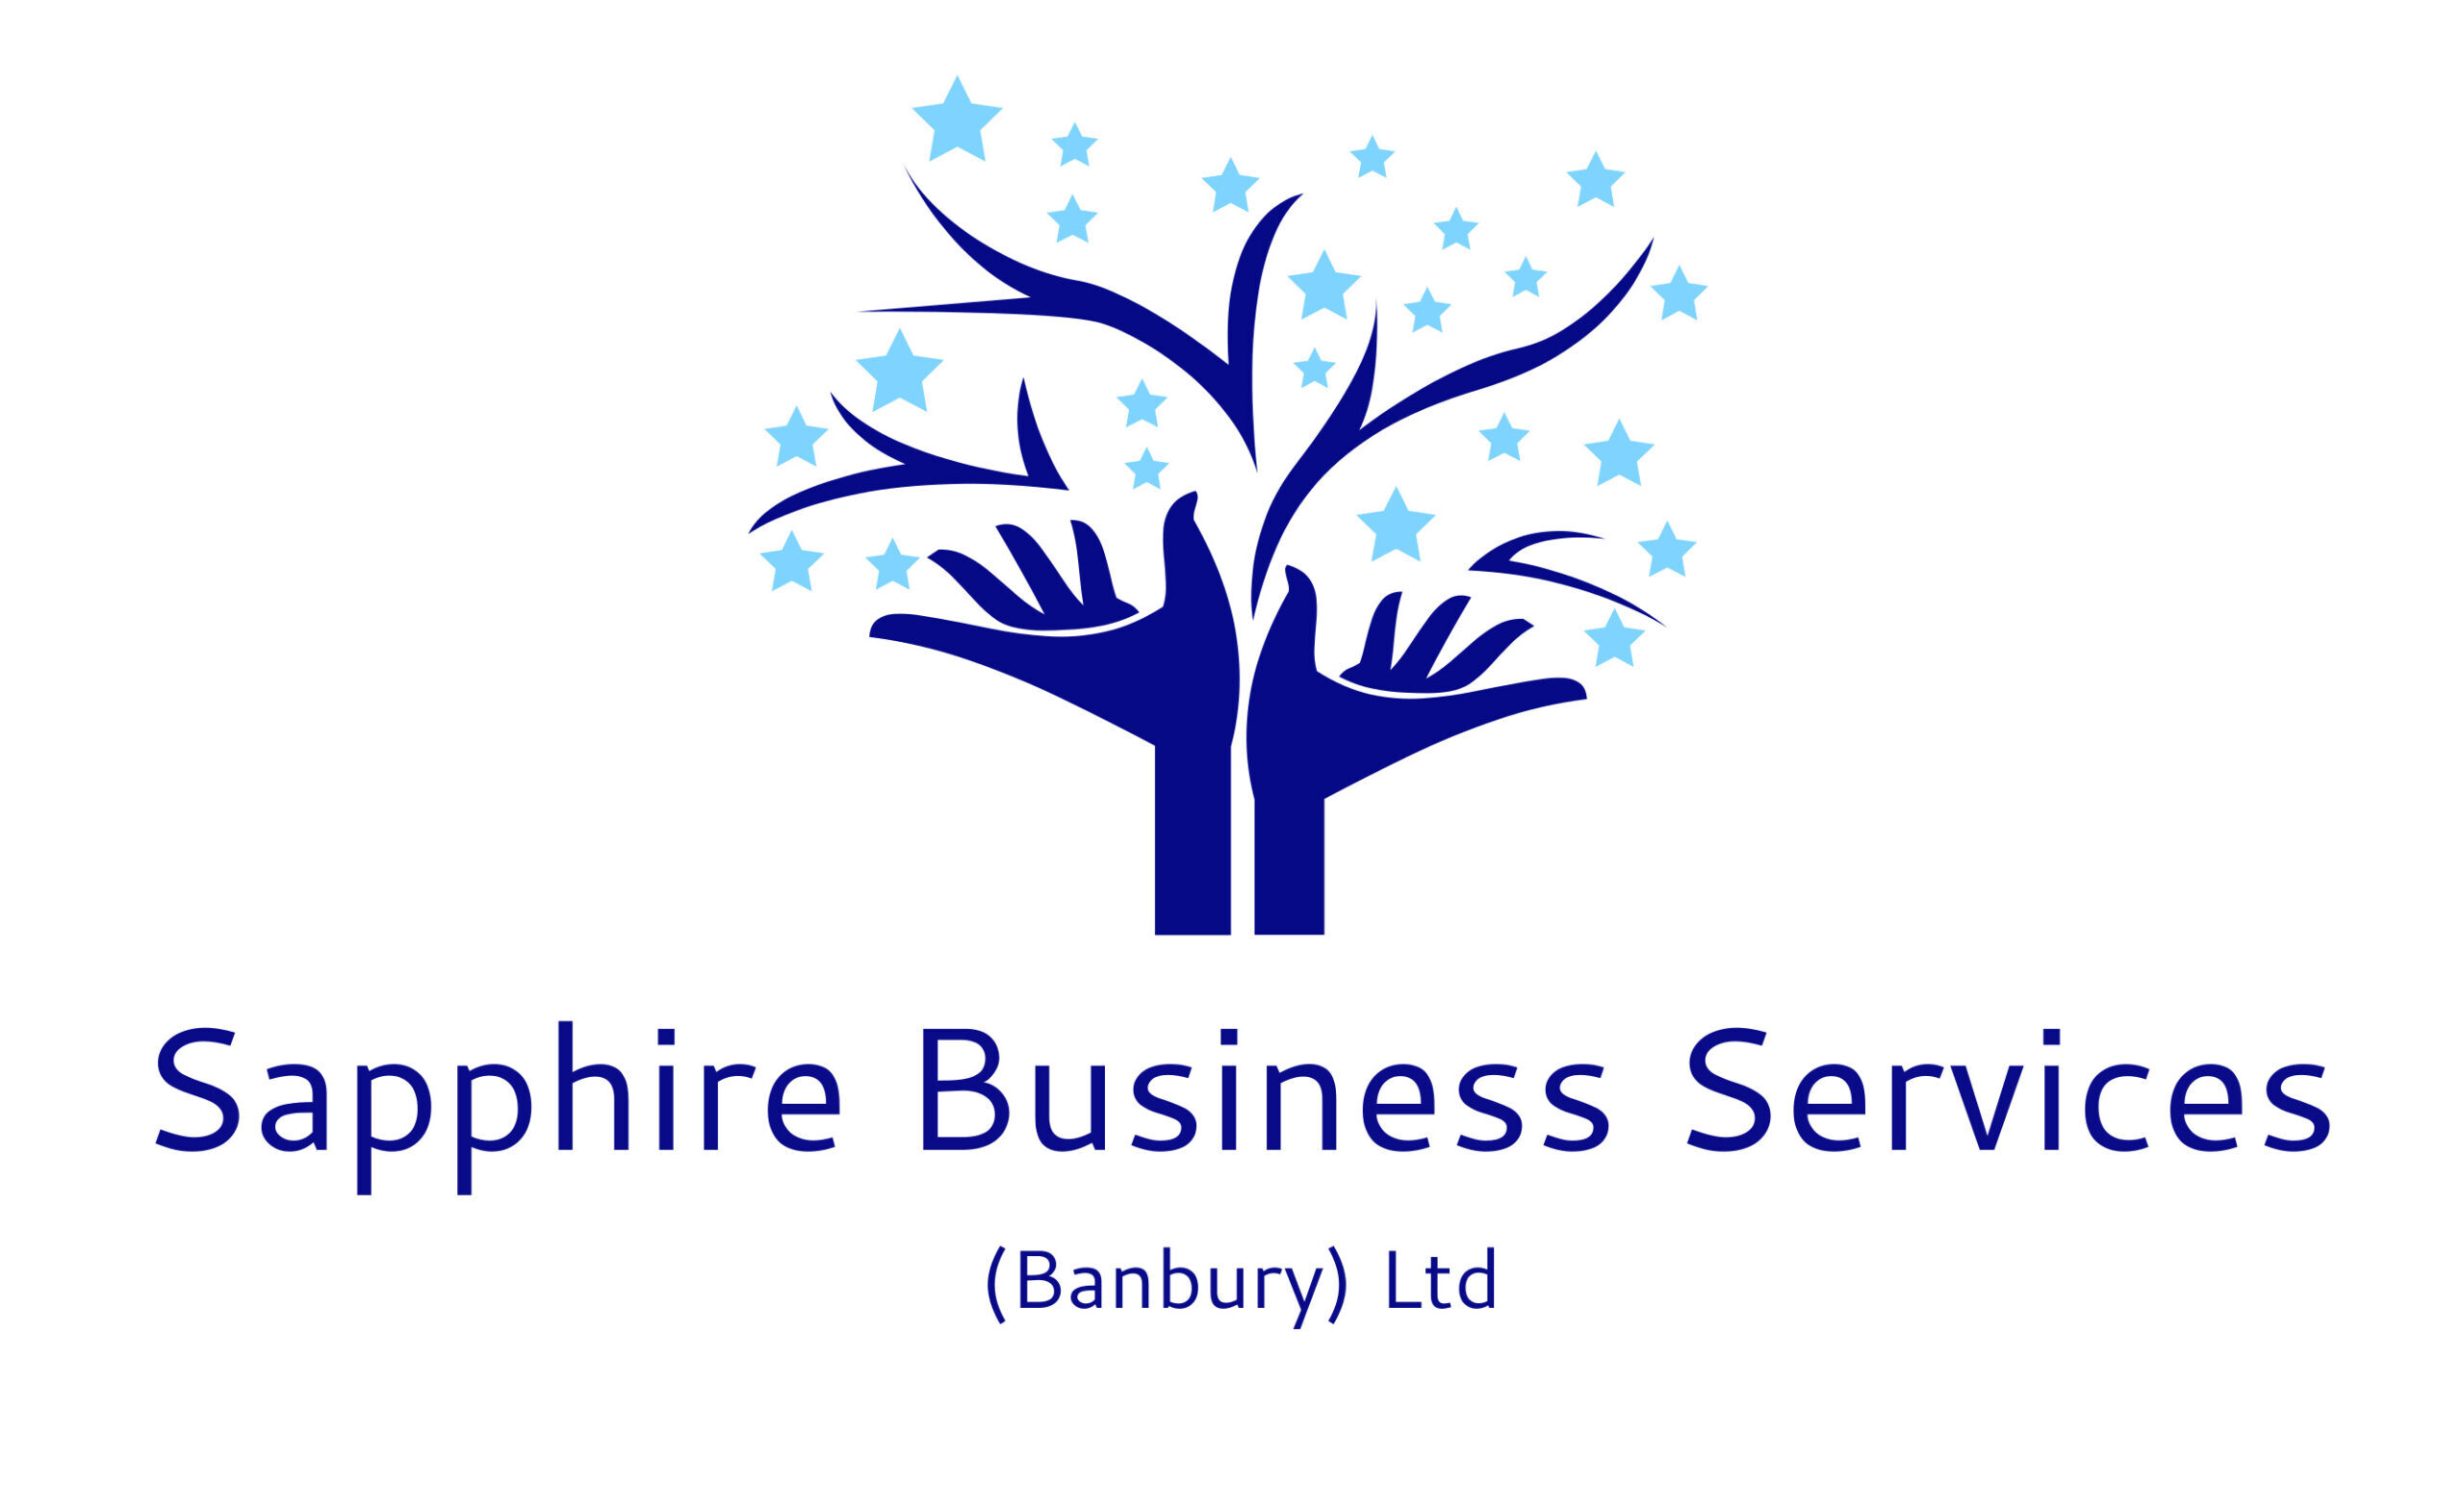 Sapphire Business Services